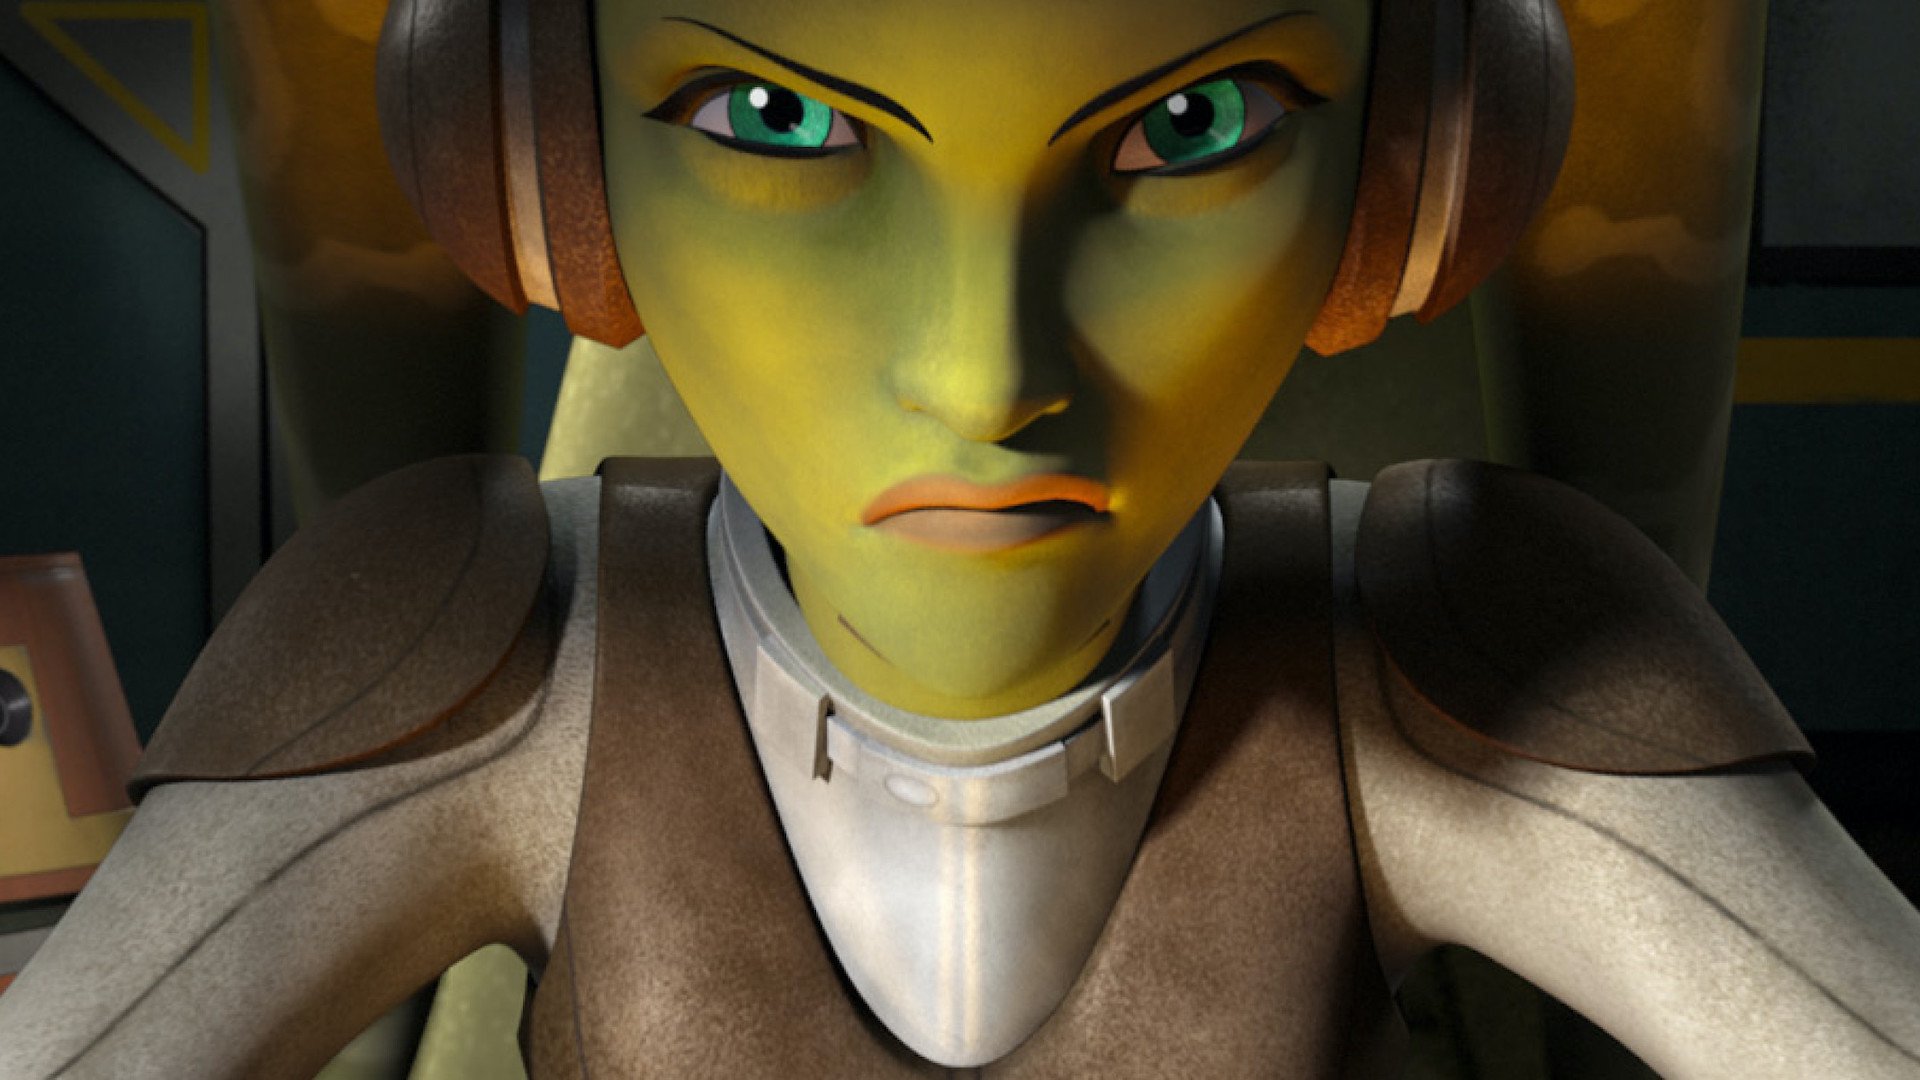 A character from Star Wars Rebels